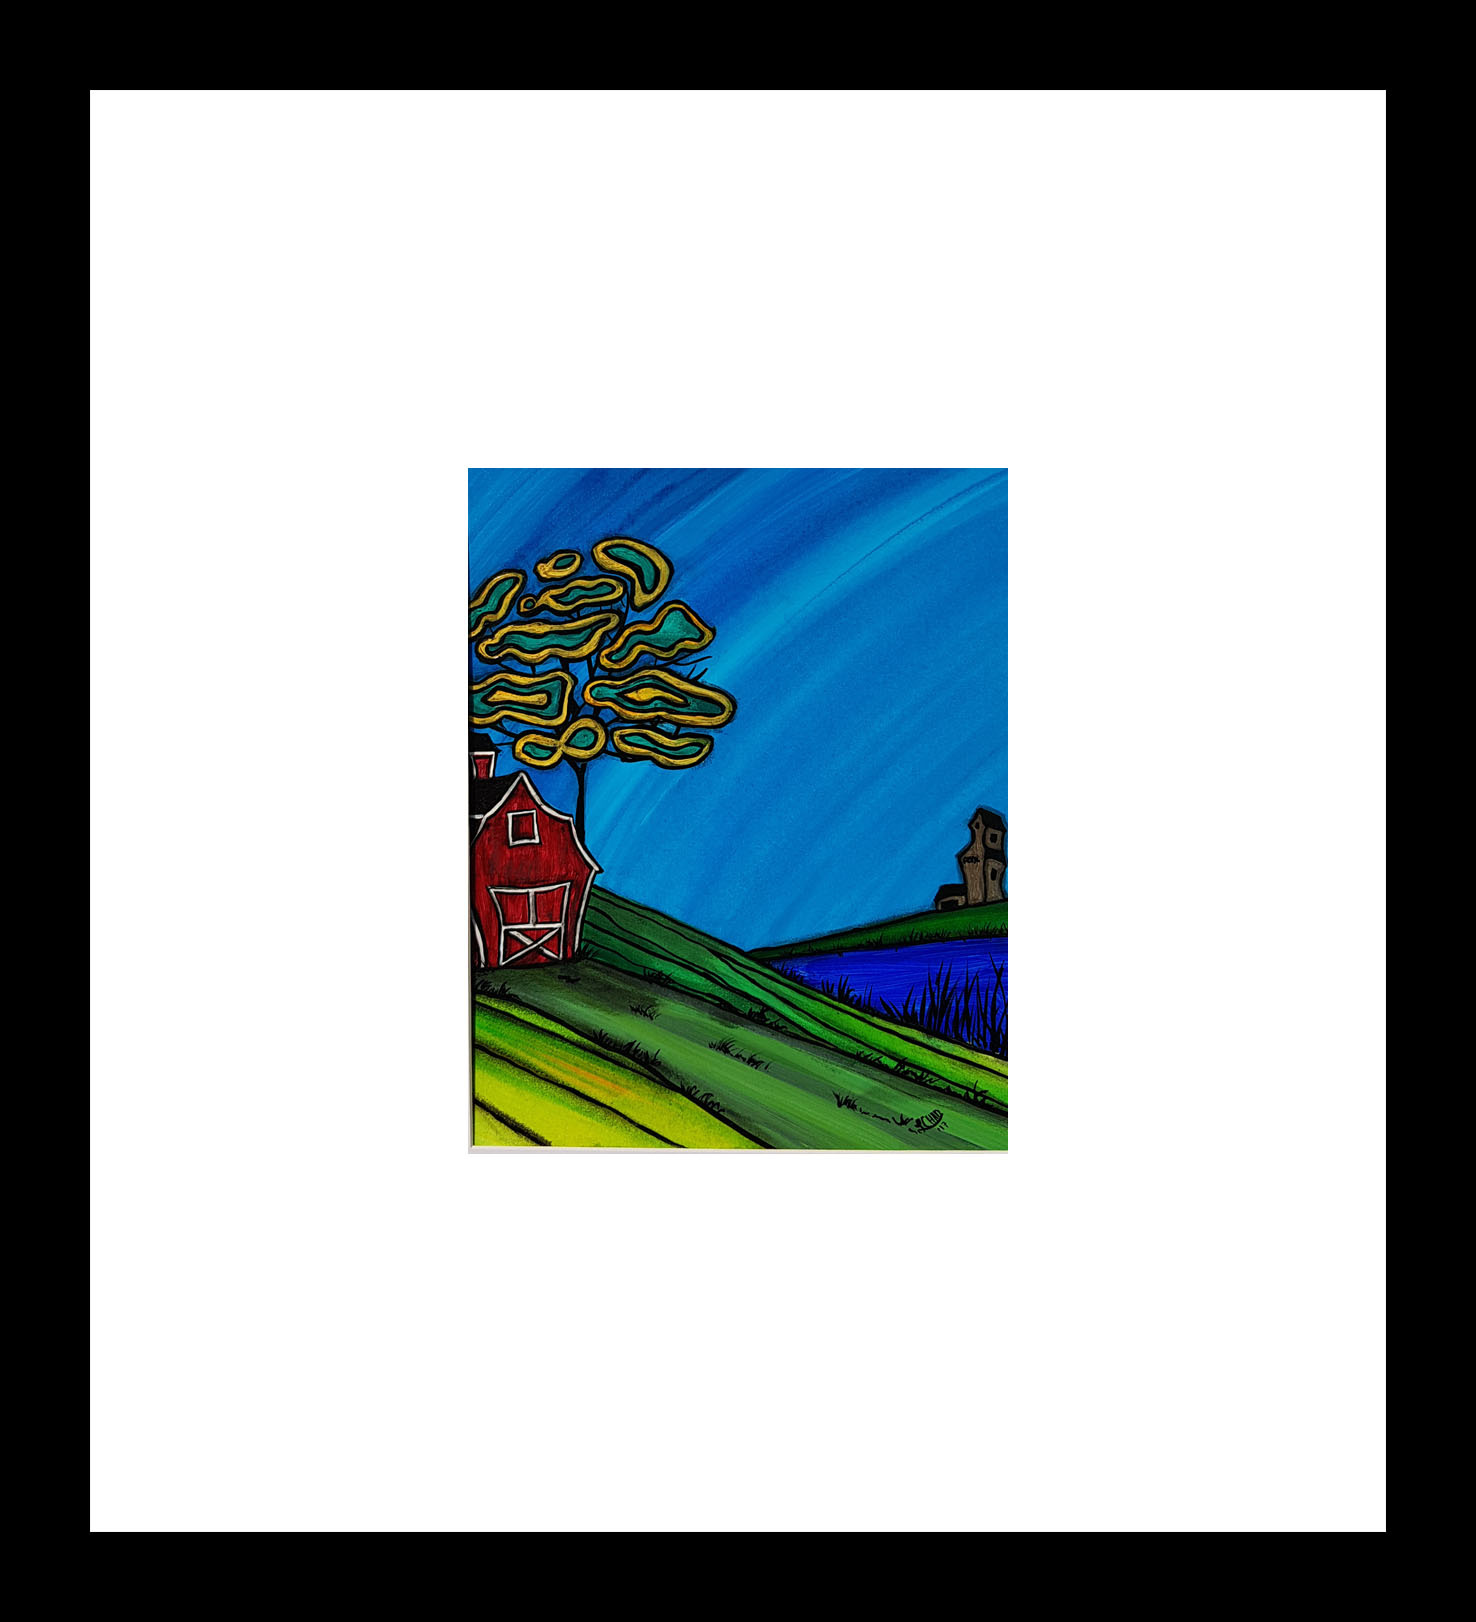 "Barn on the Hill" [2018]
Image: 7.5" x 9.5"
Framed: 20" x 20"
Acrylic on 246 lb. paper
$200.00 SOLD